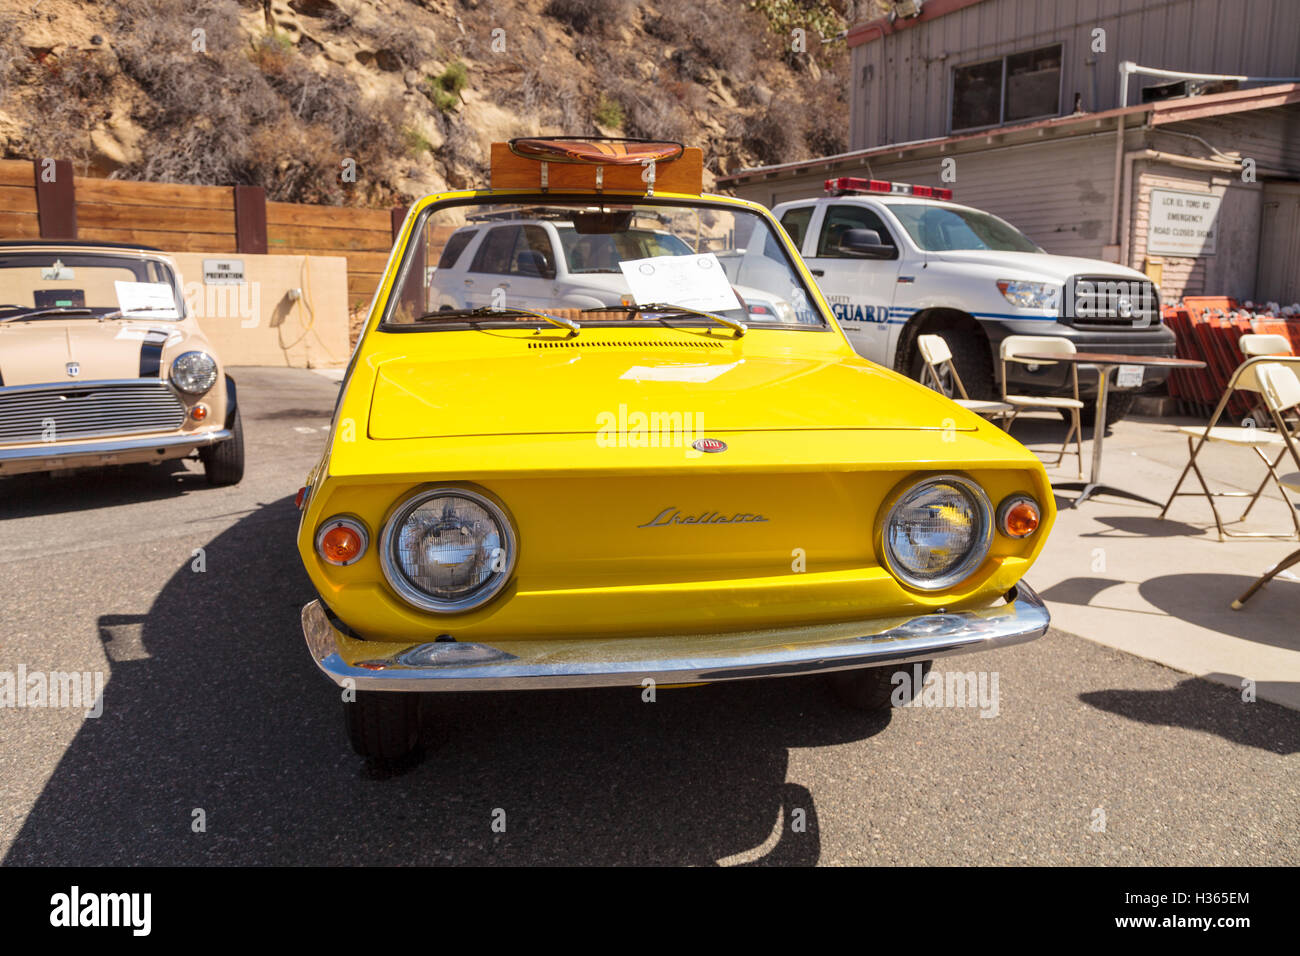 Laguna Beach, CA, USA - October 2, 2016: Yellow 1970 Fiat Schiller with wicker seats owned by Jim Roy Stock Photo